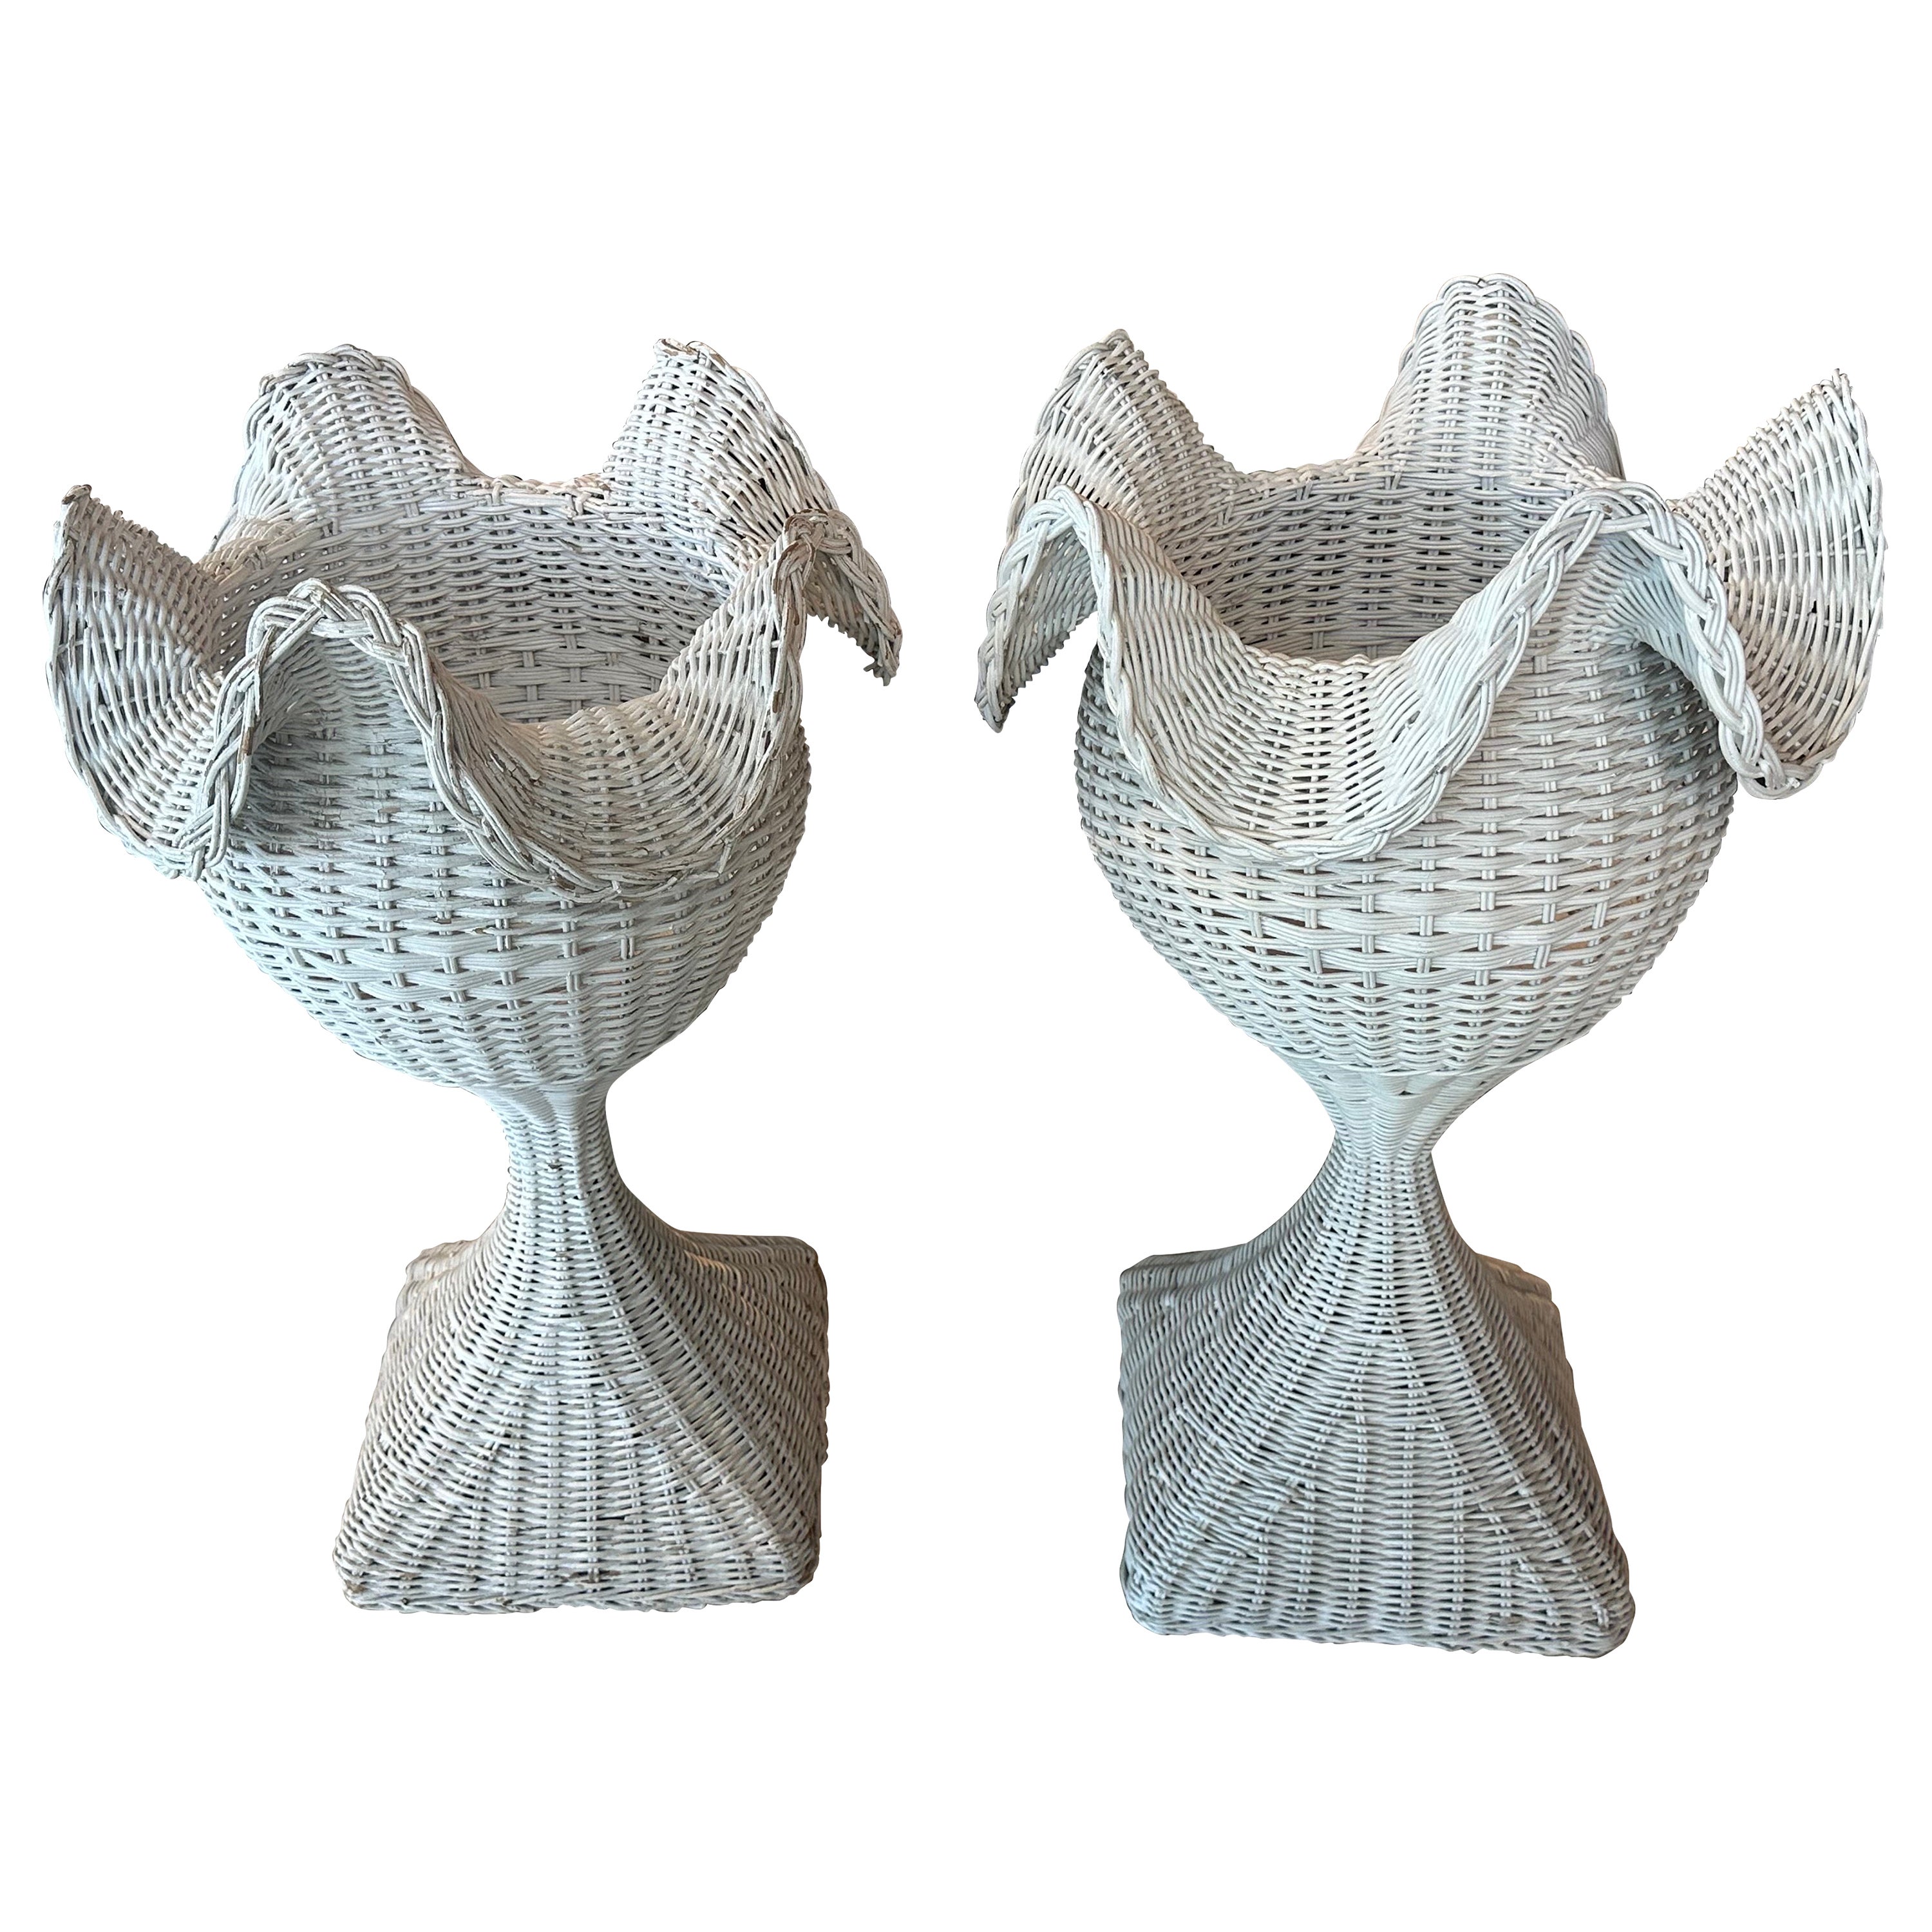 Vintage Pair 1940s French White Chippy Wicker Scalloped Ruffle Edge Planters 